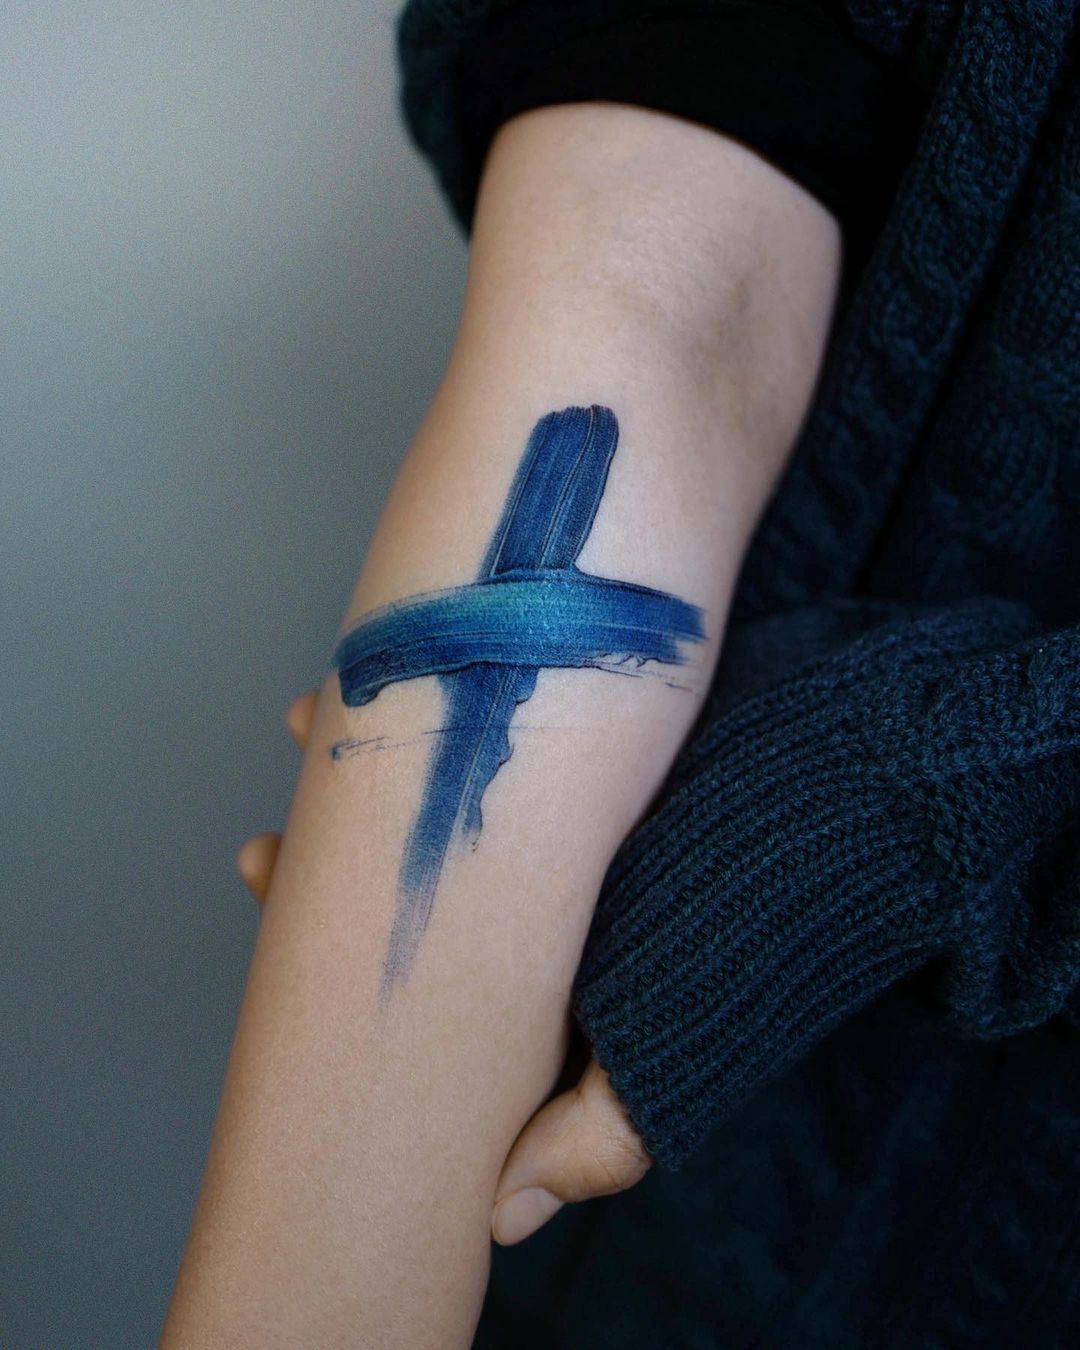 Blue Painted Cross Tattoo with a Faded Base, Cross Tattoos